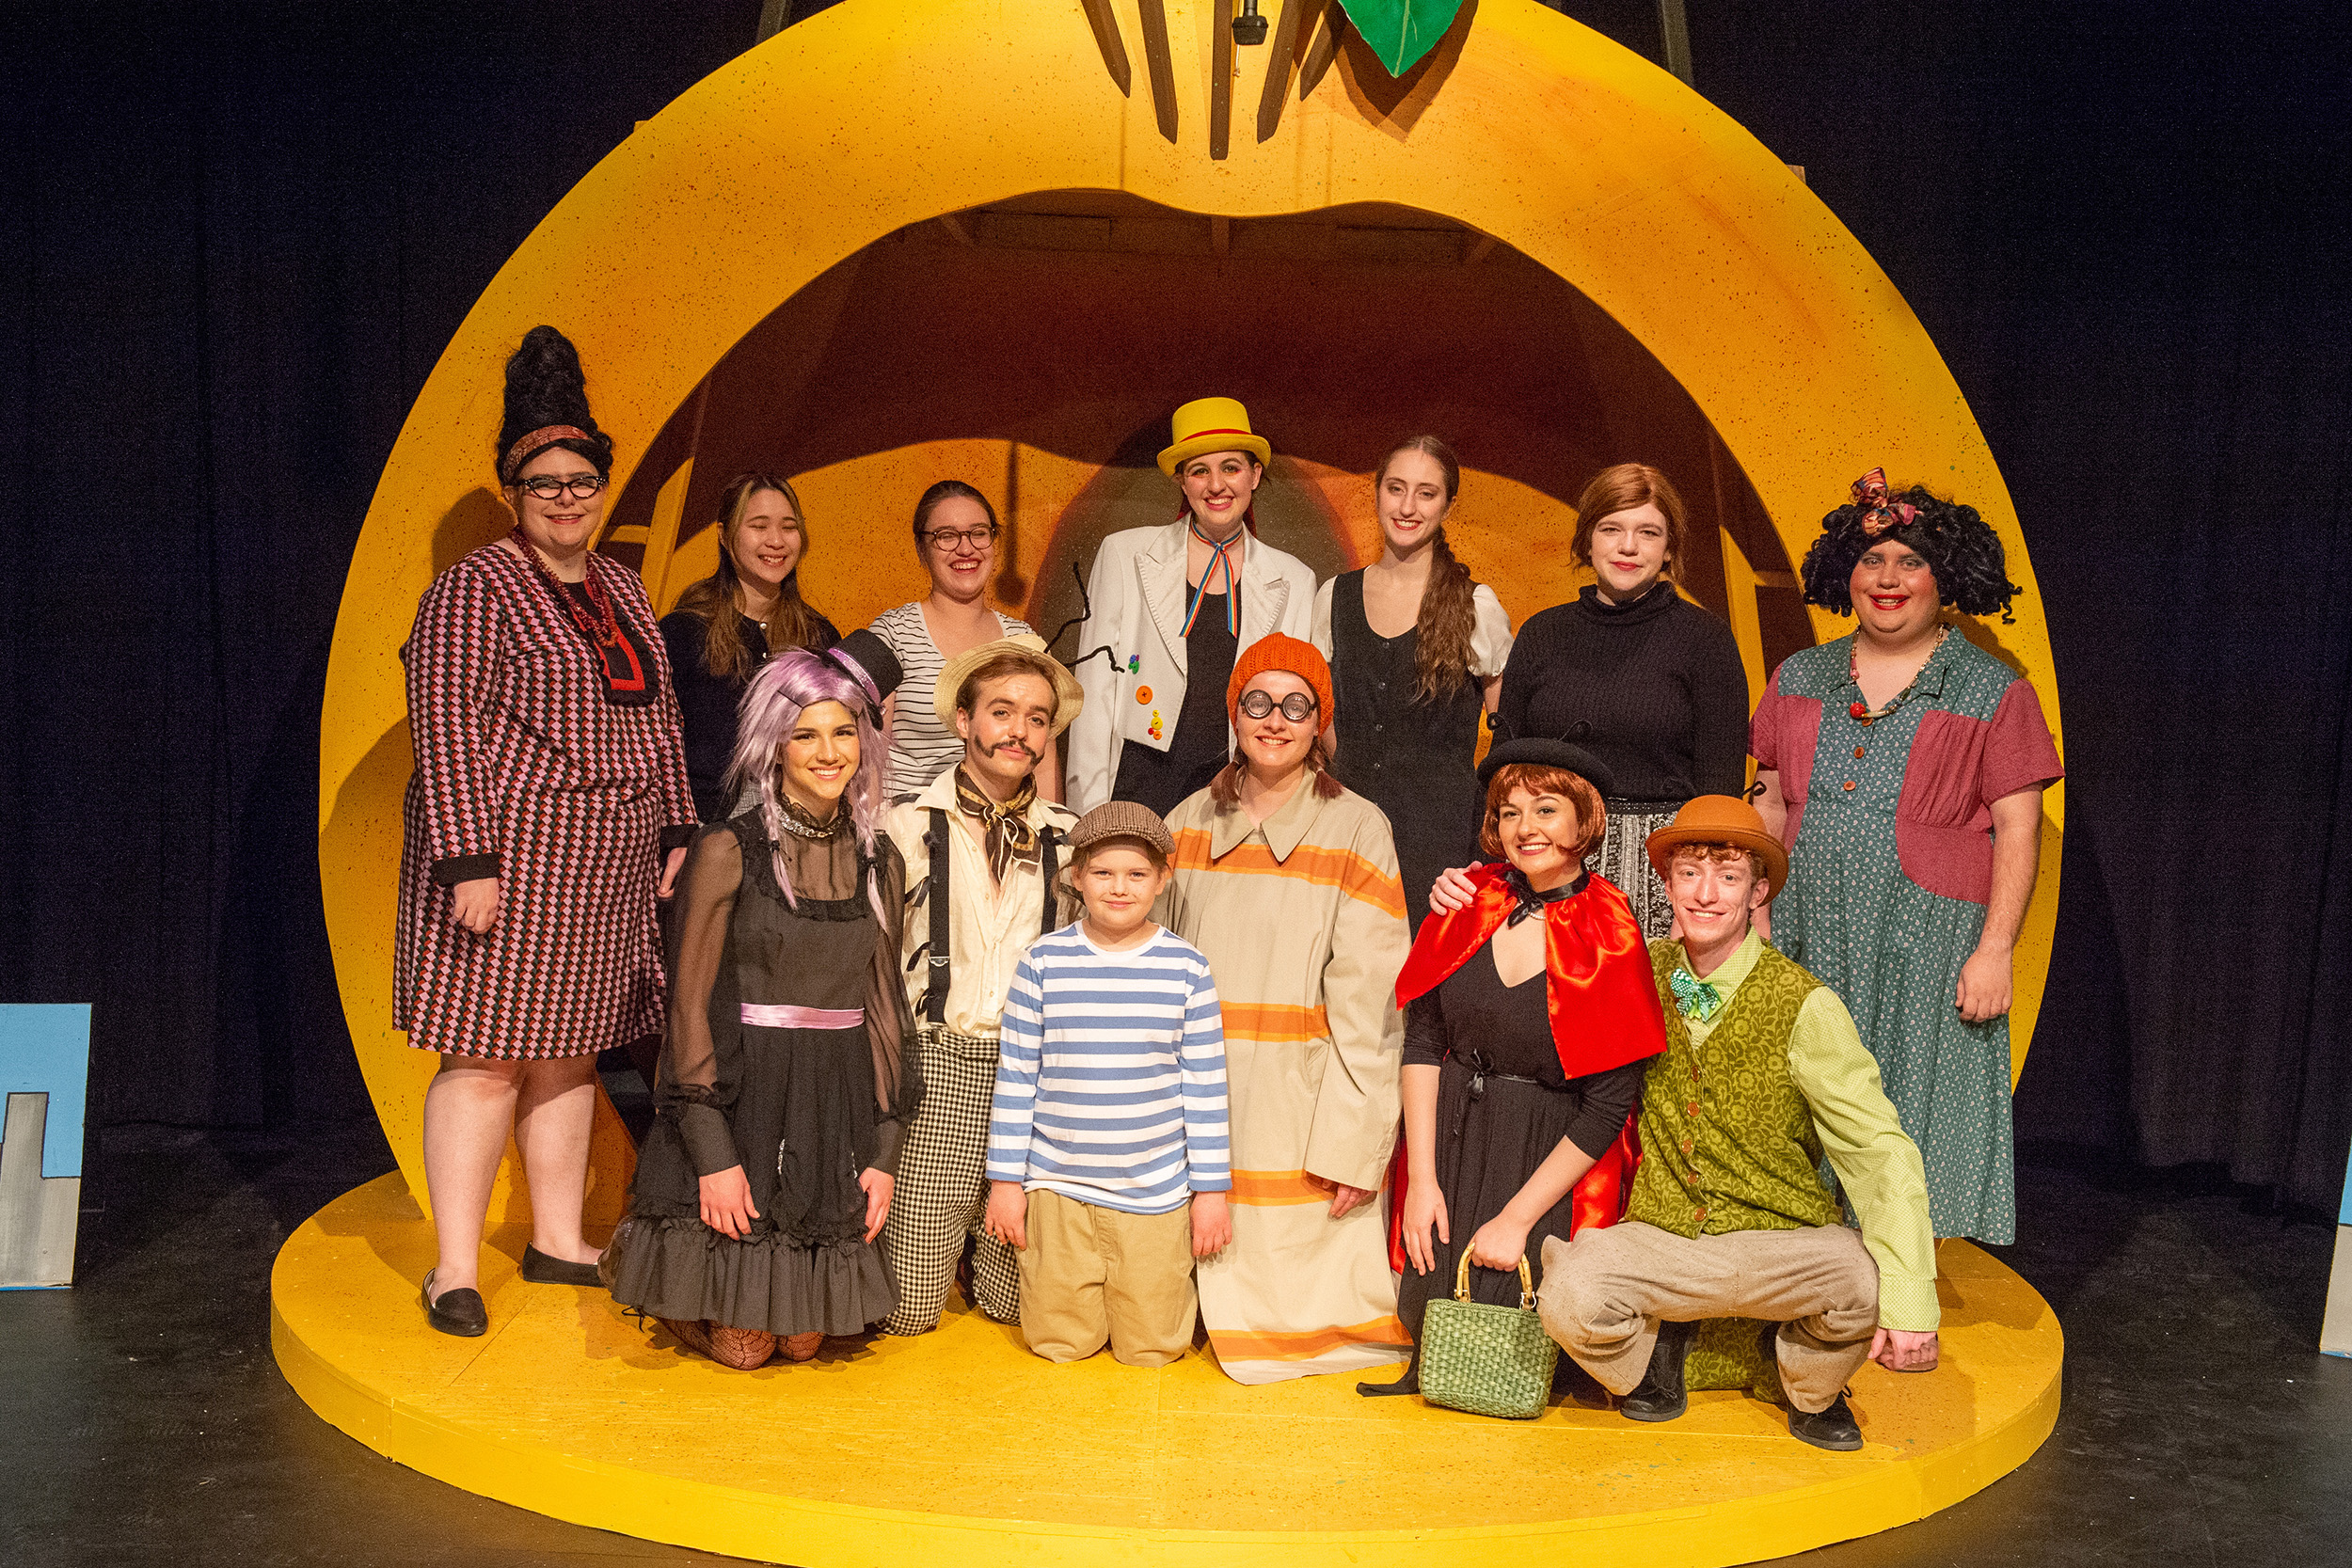 Cast photo from Hesston College production of James and the Giant Peach, spring 2022